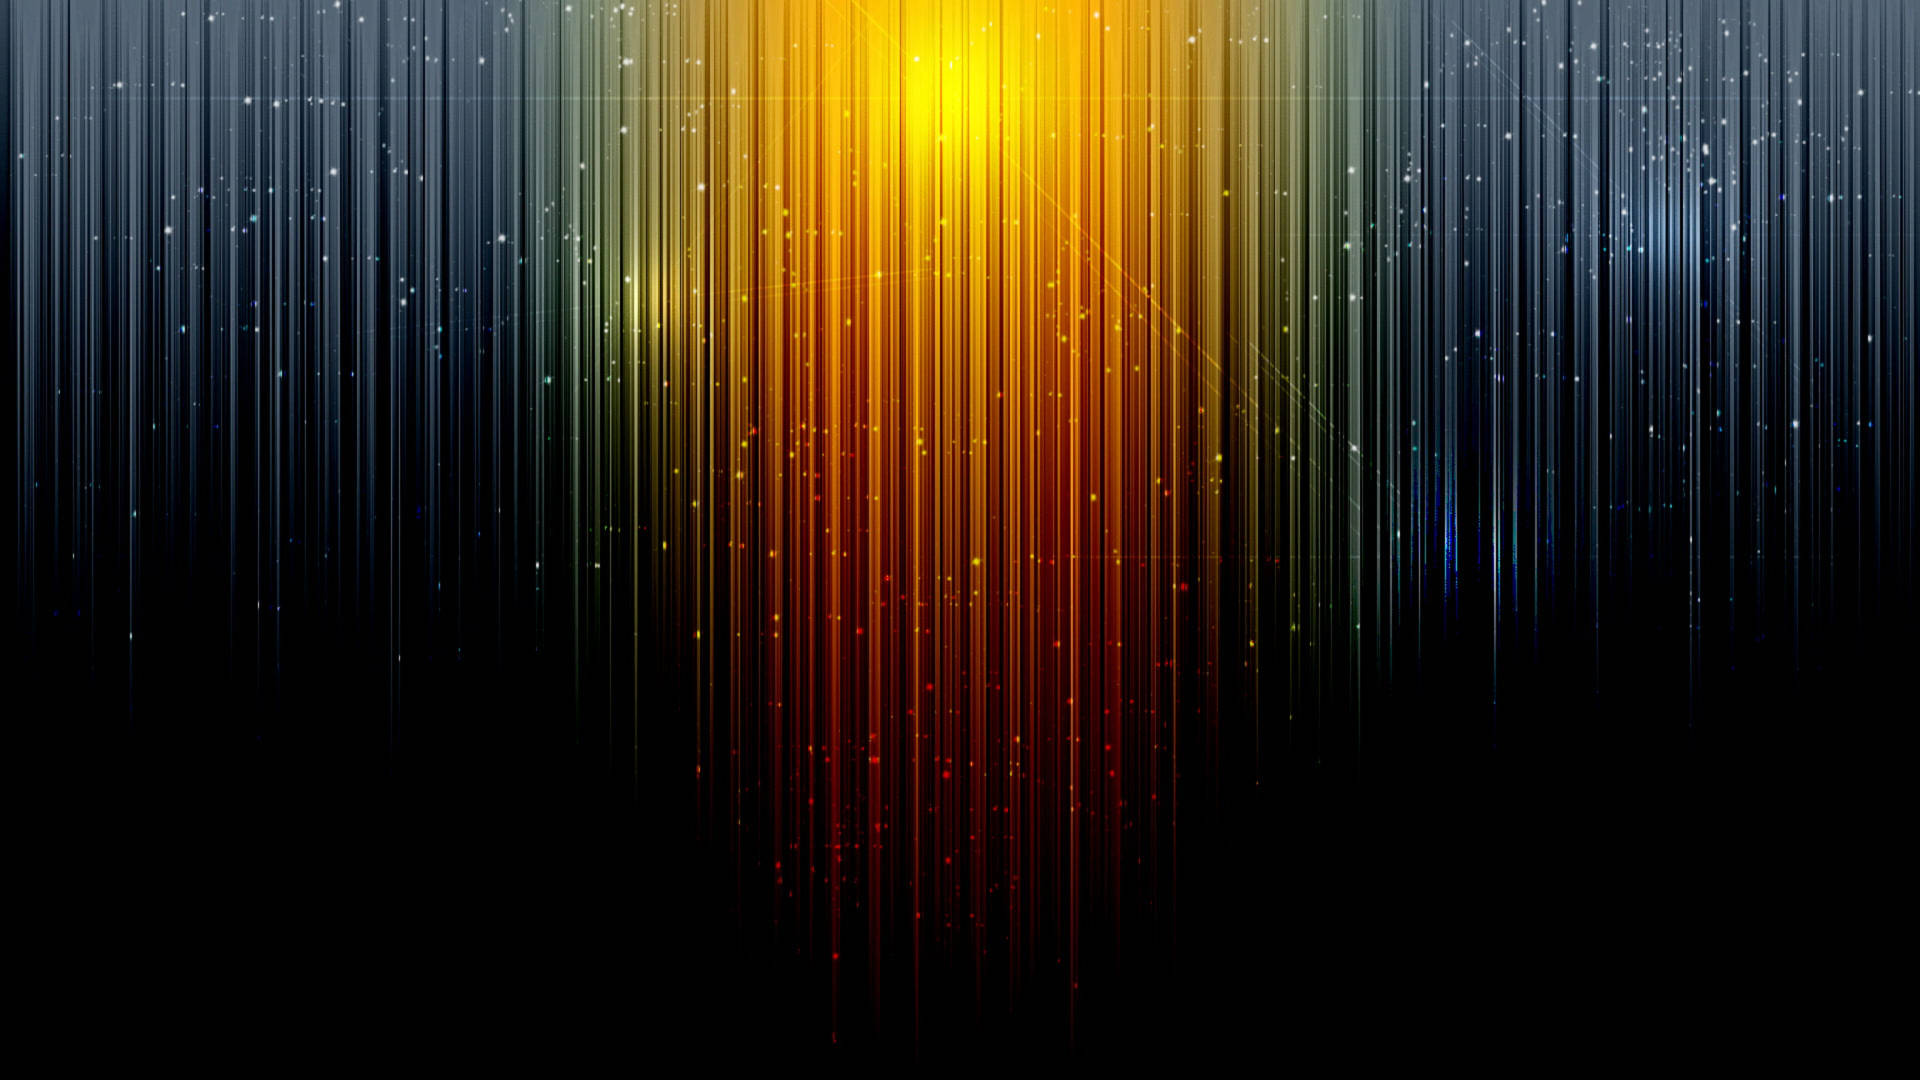 A Stunning Visualization Of The Electromagnetic Spectrum, Showcasing Various Wave Frequencies. Background